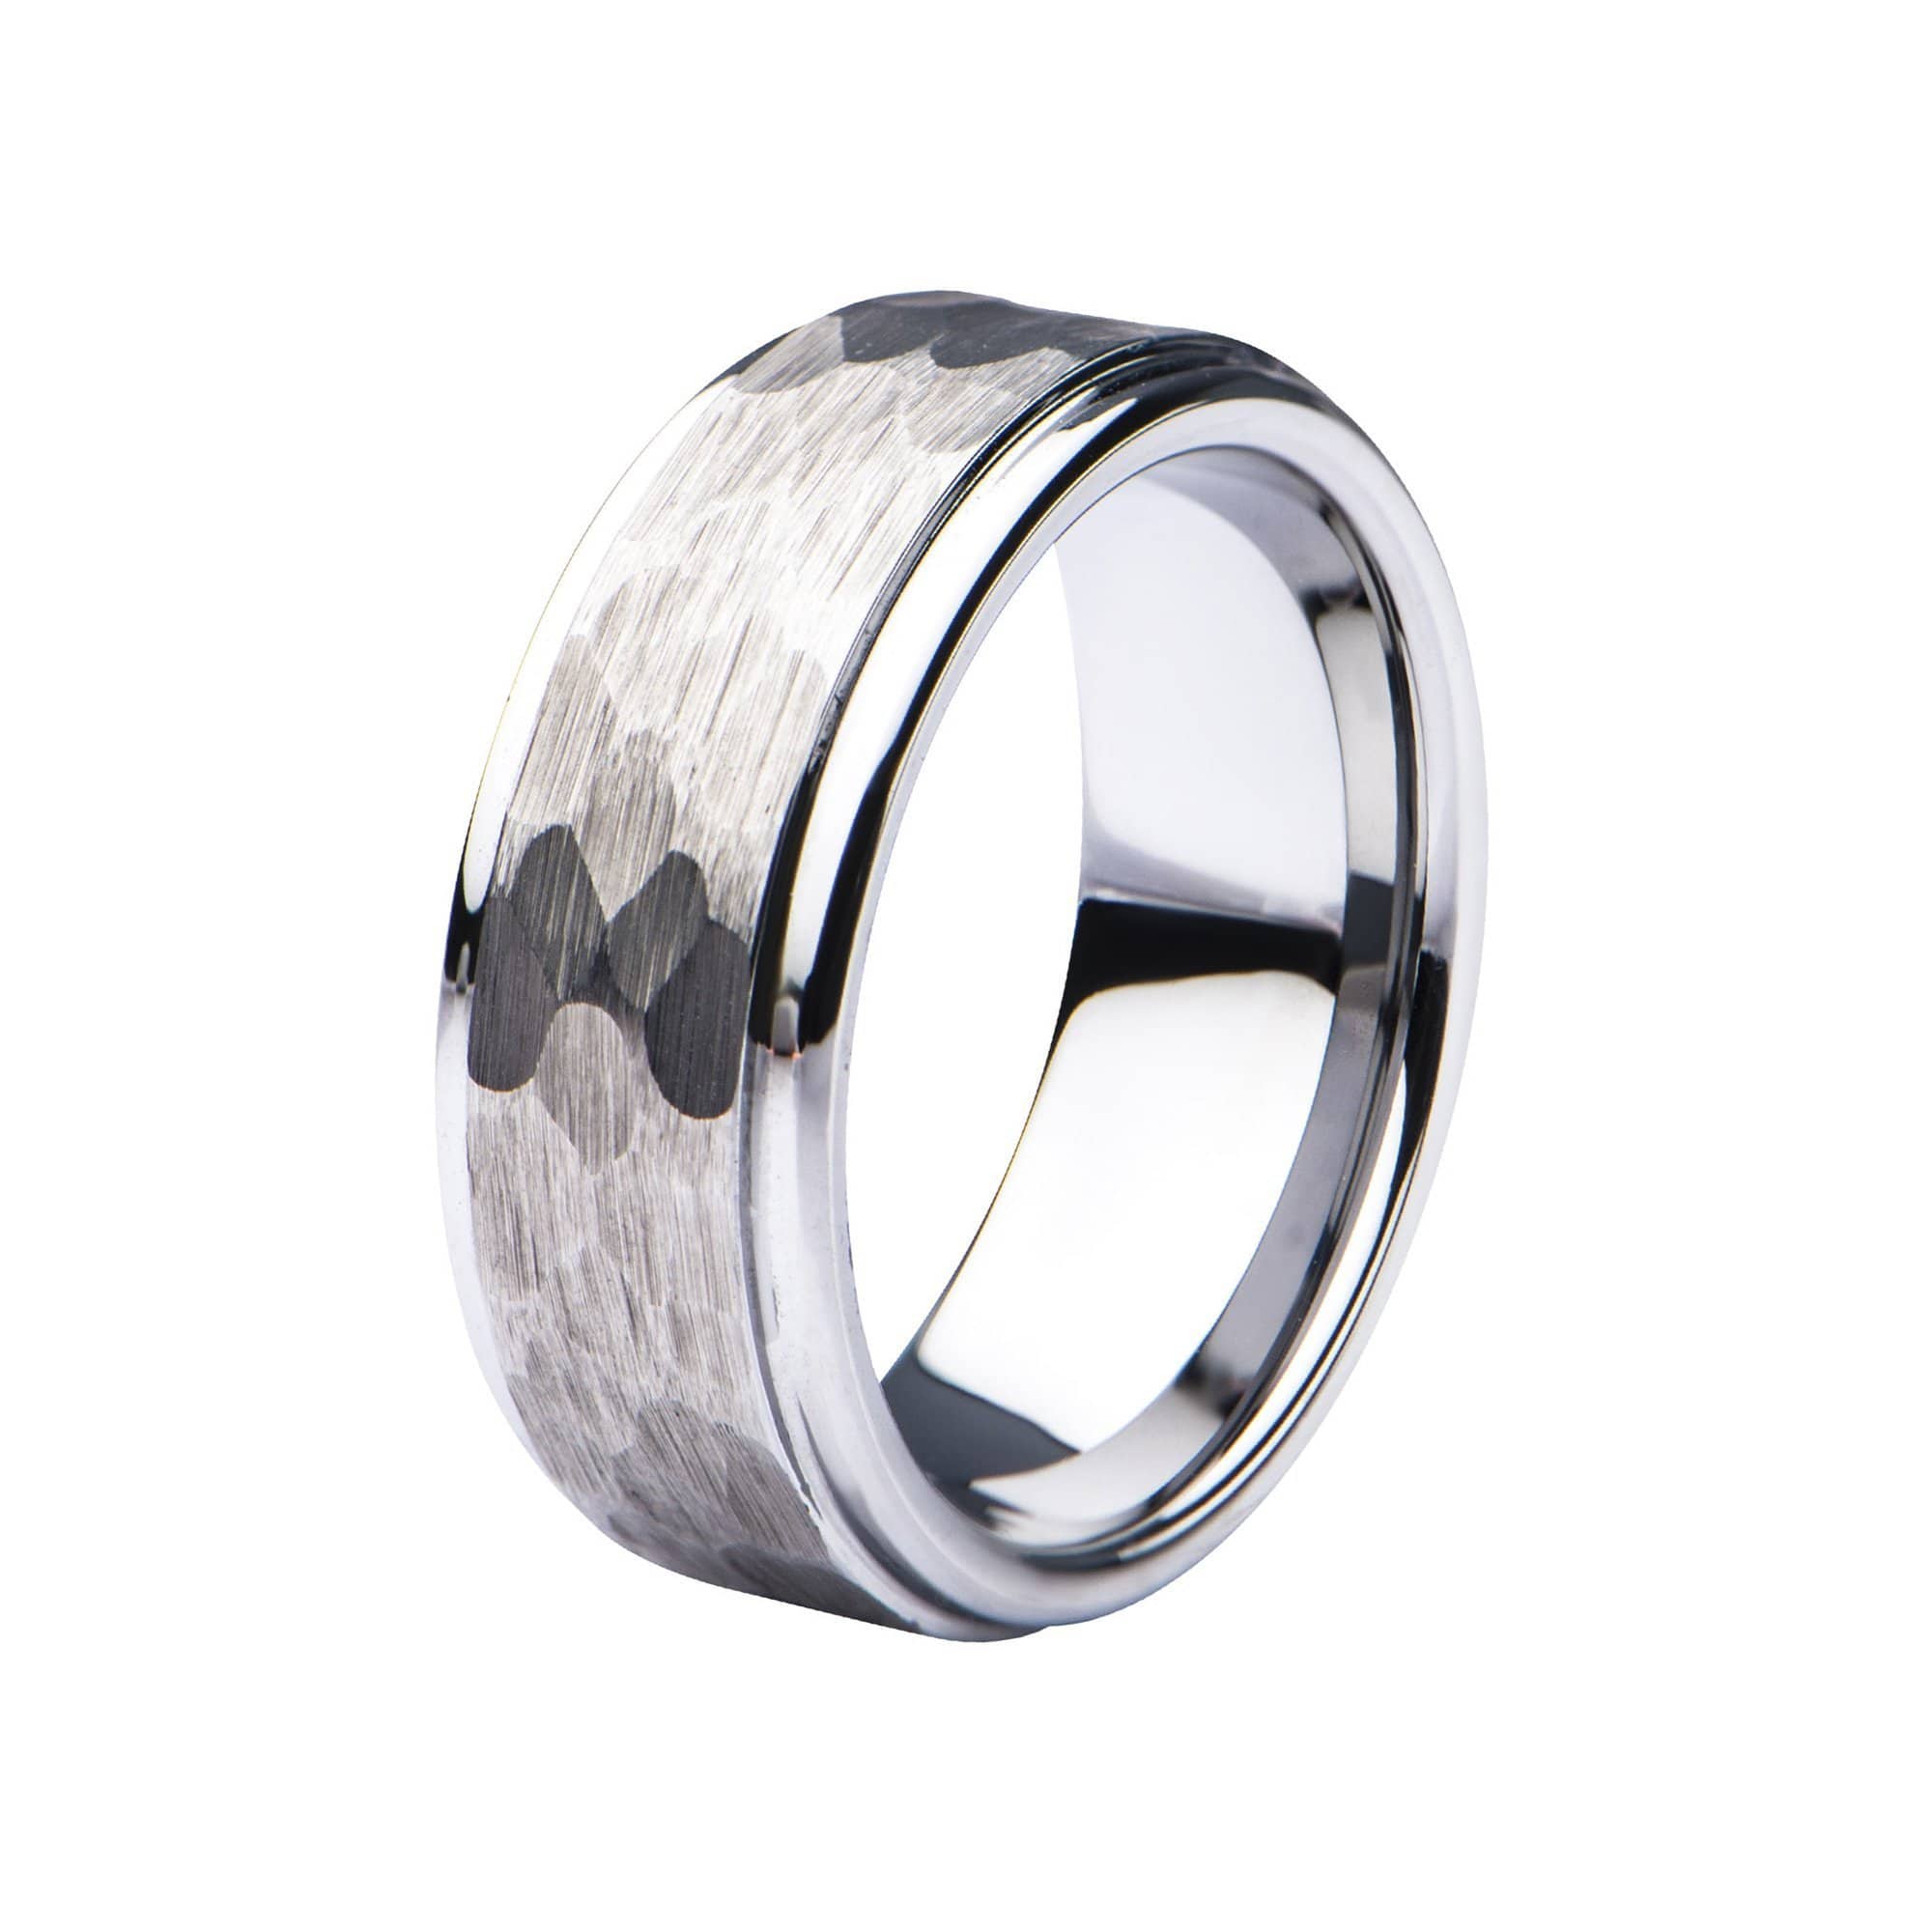 INOX JEWELRY Rings Silver Tone Stainless Steel Hammered Finish Polished Wedding Band Ring